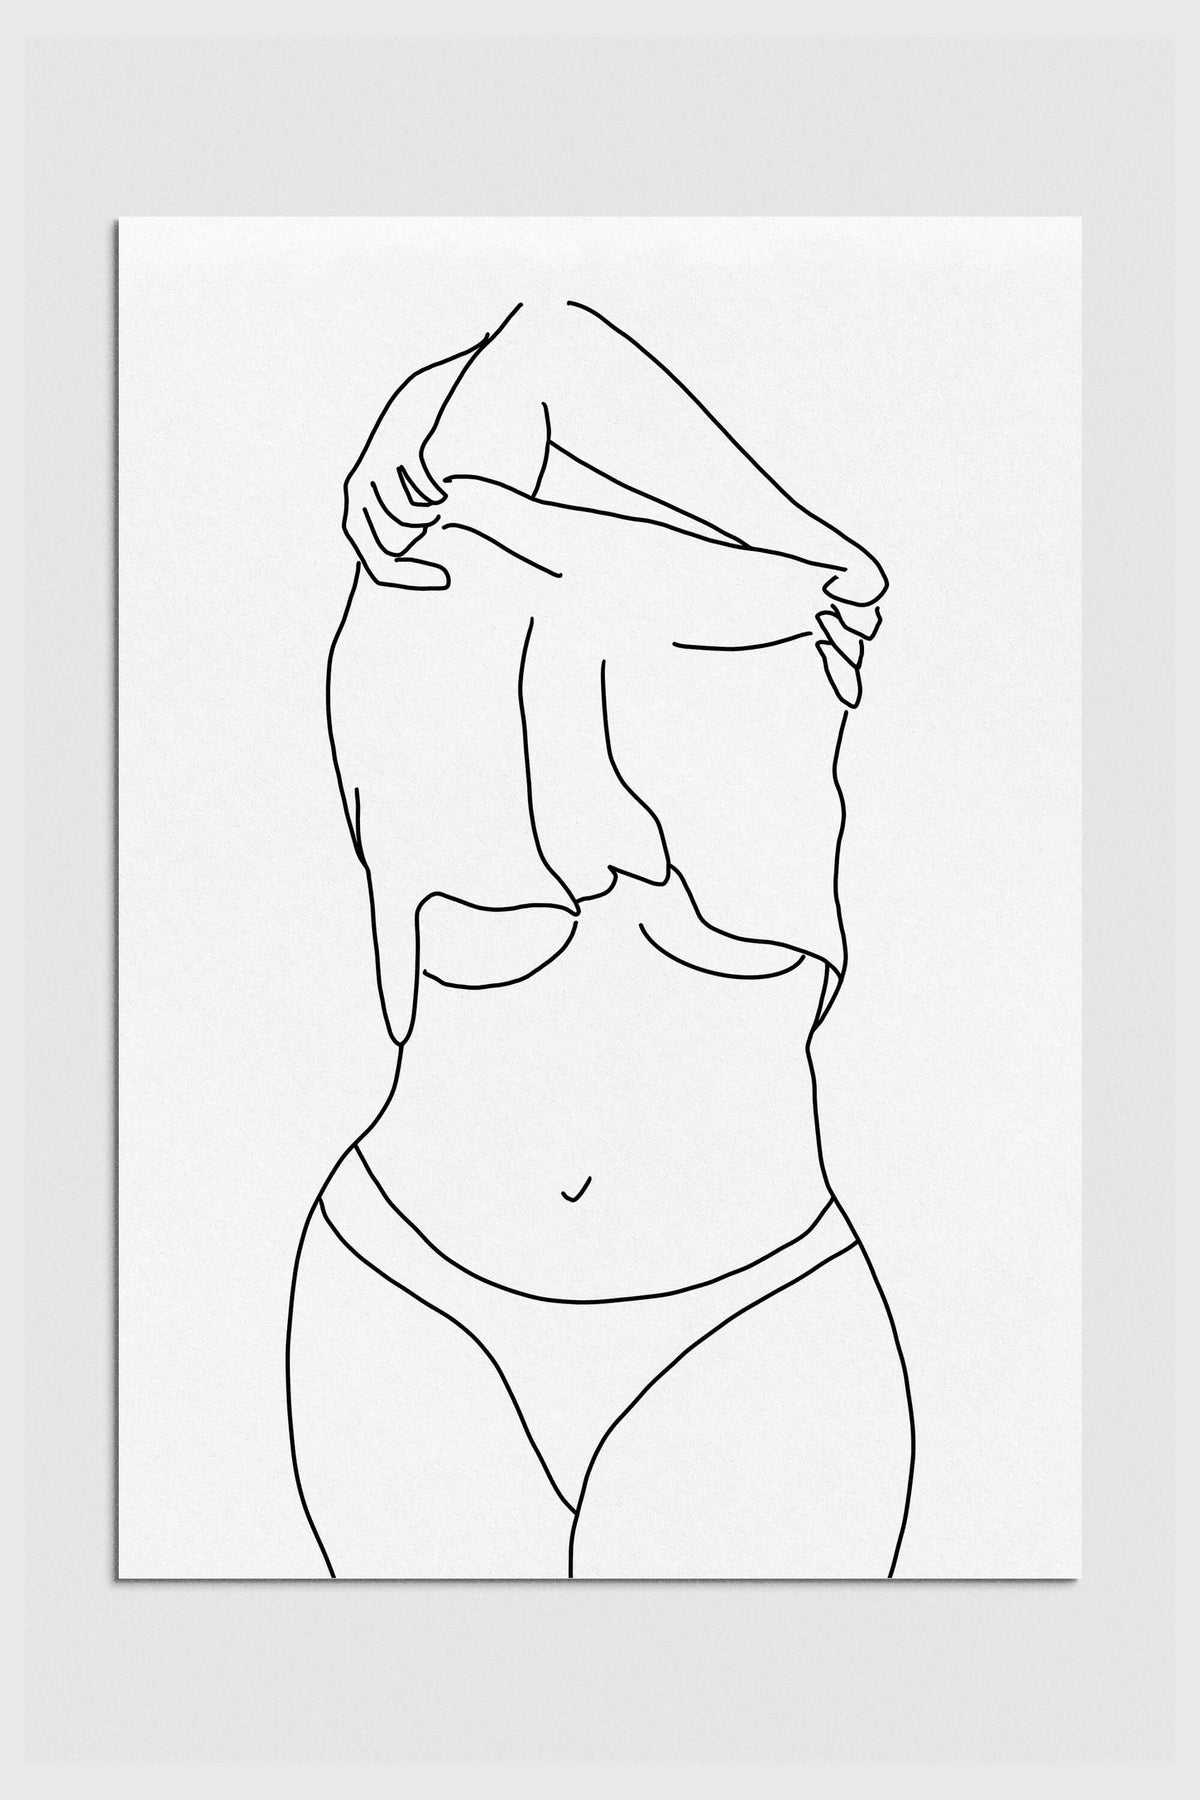 Monochrome line drawing of an empowered woman, celebrating strength and individuality. Feminist wall art with elegant lines conveying a powerful message.